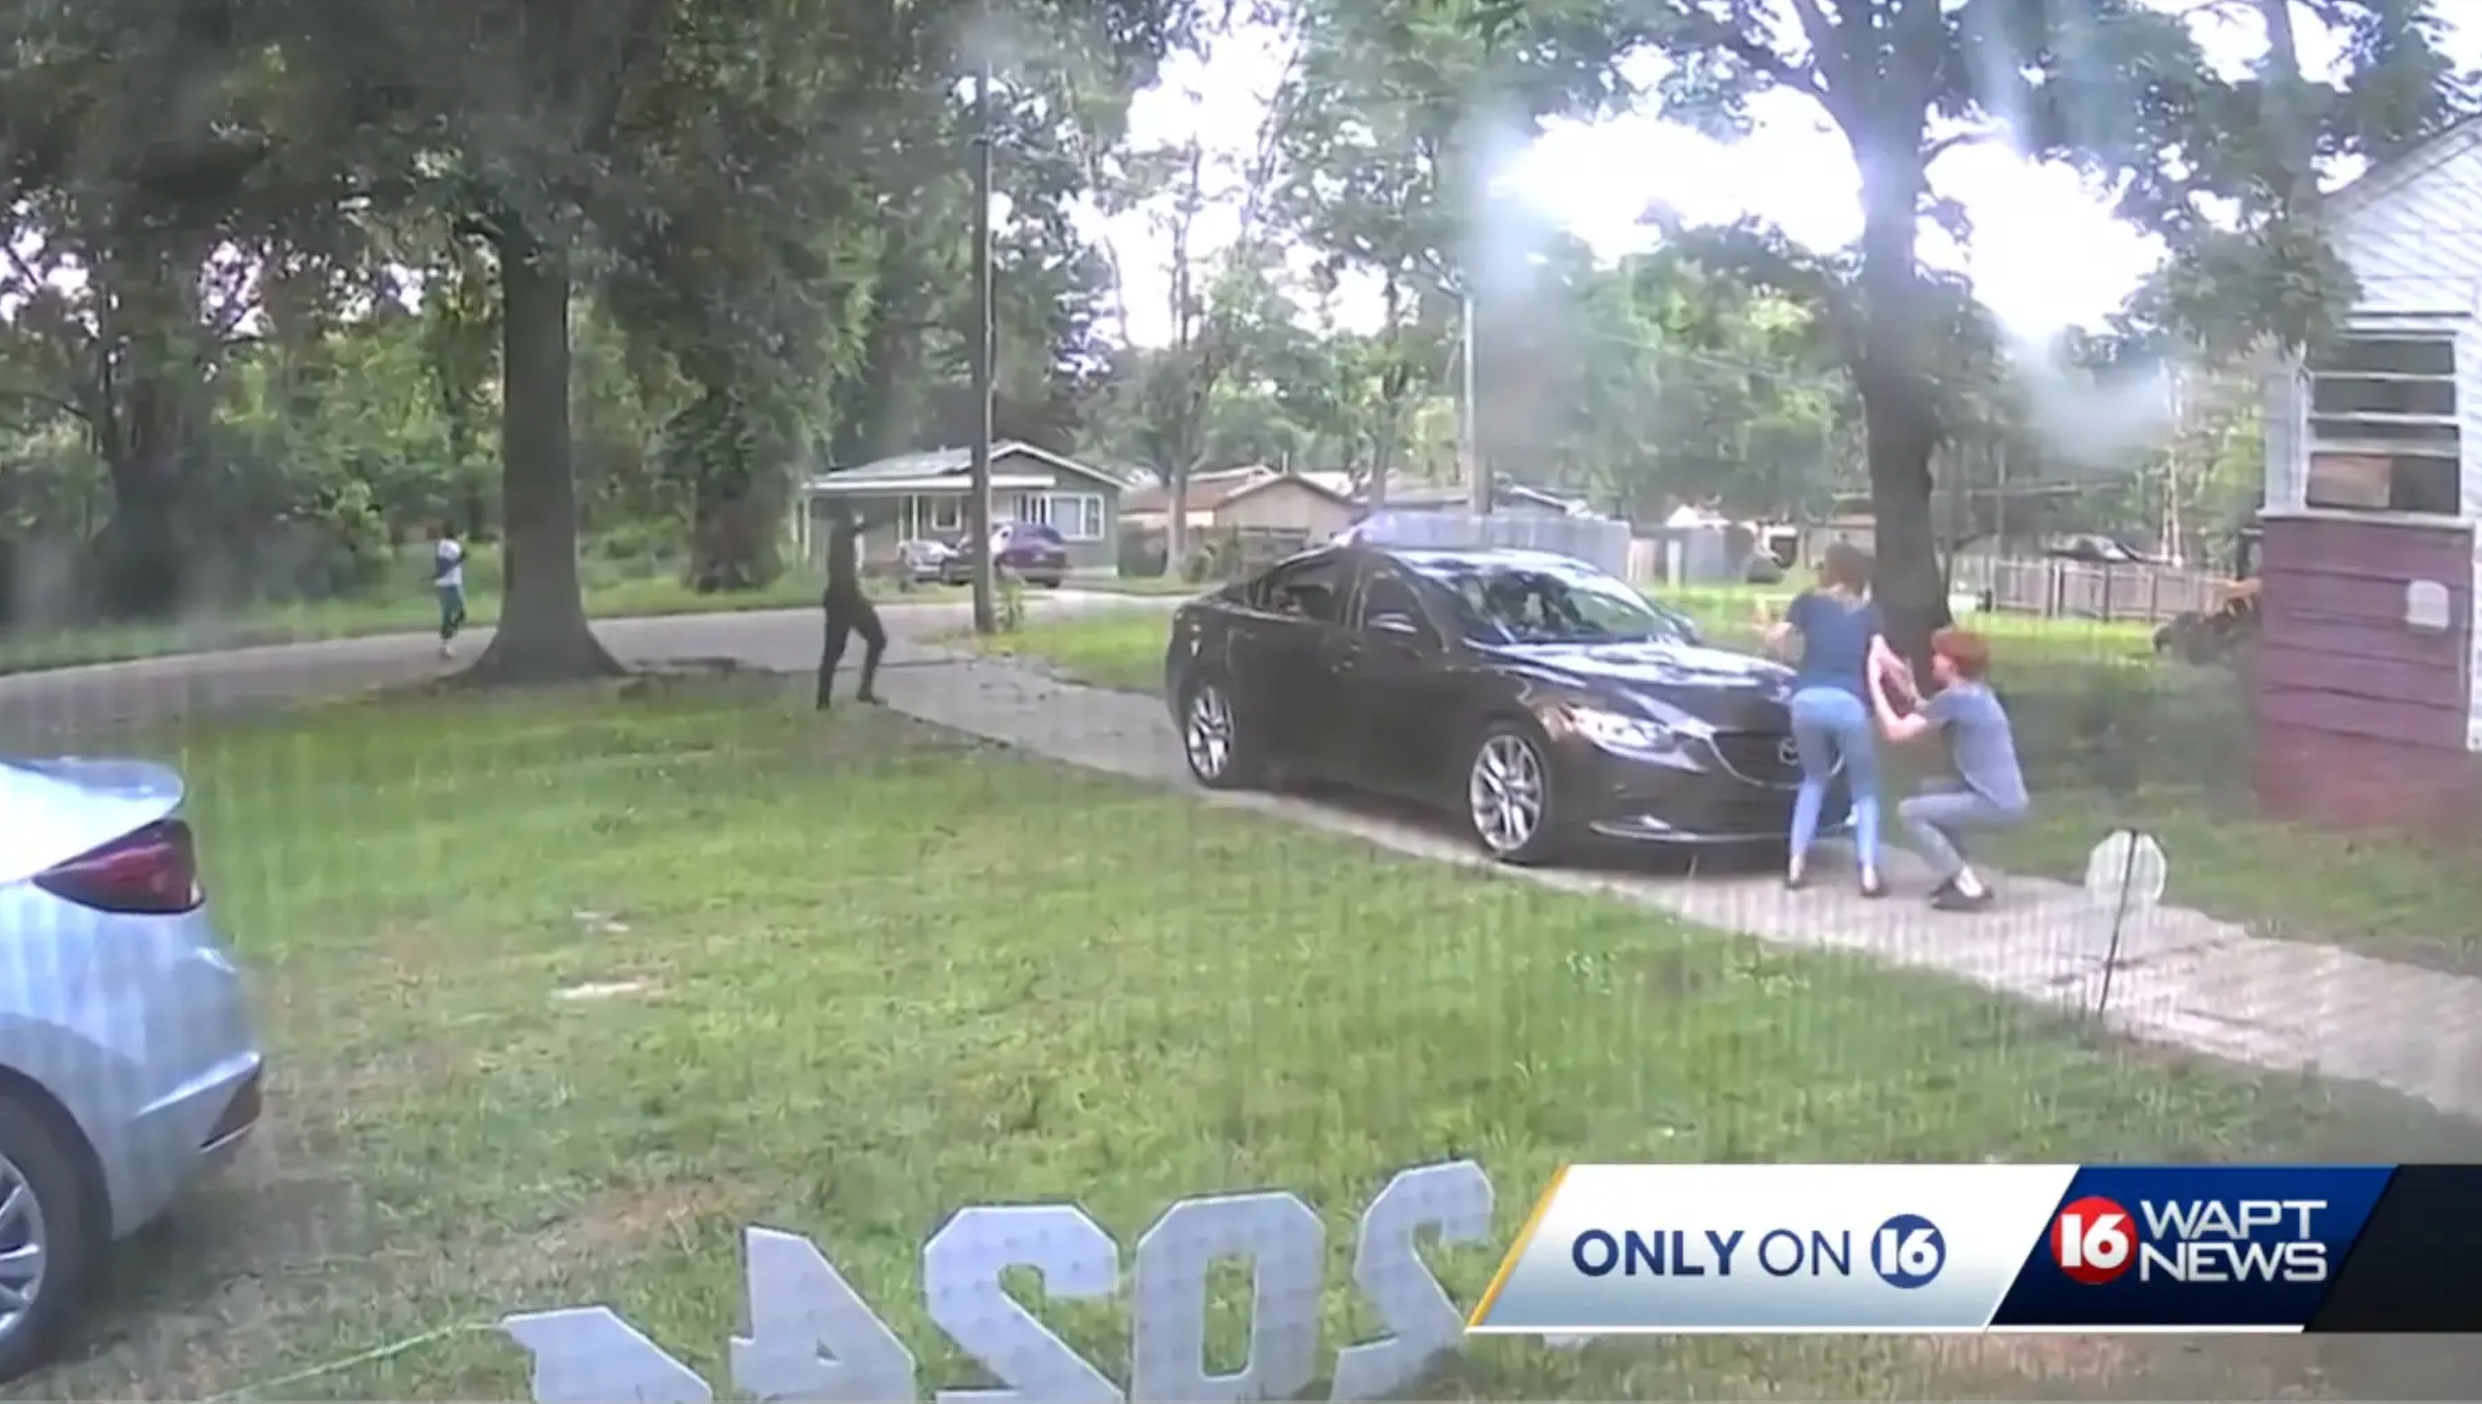 Heather Allen and her son duck behind a car as two men walk up their driveway with guns